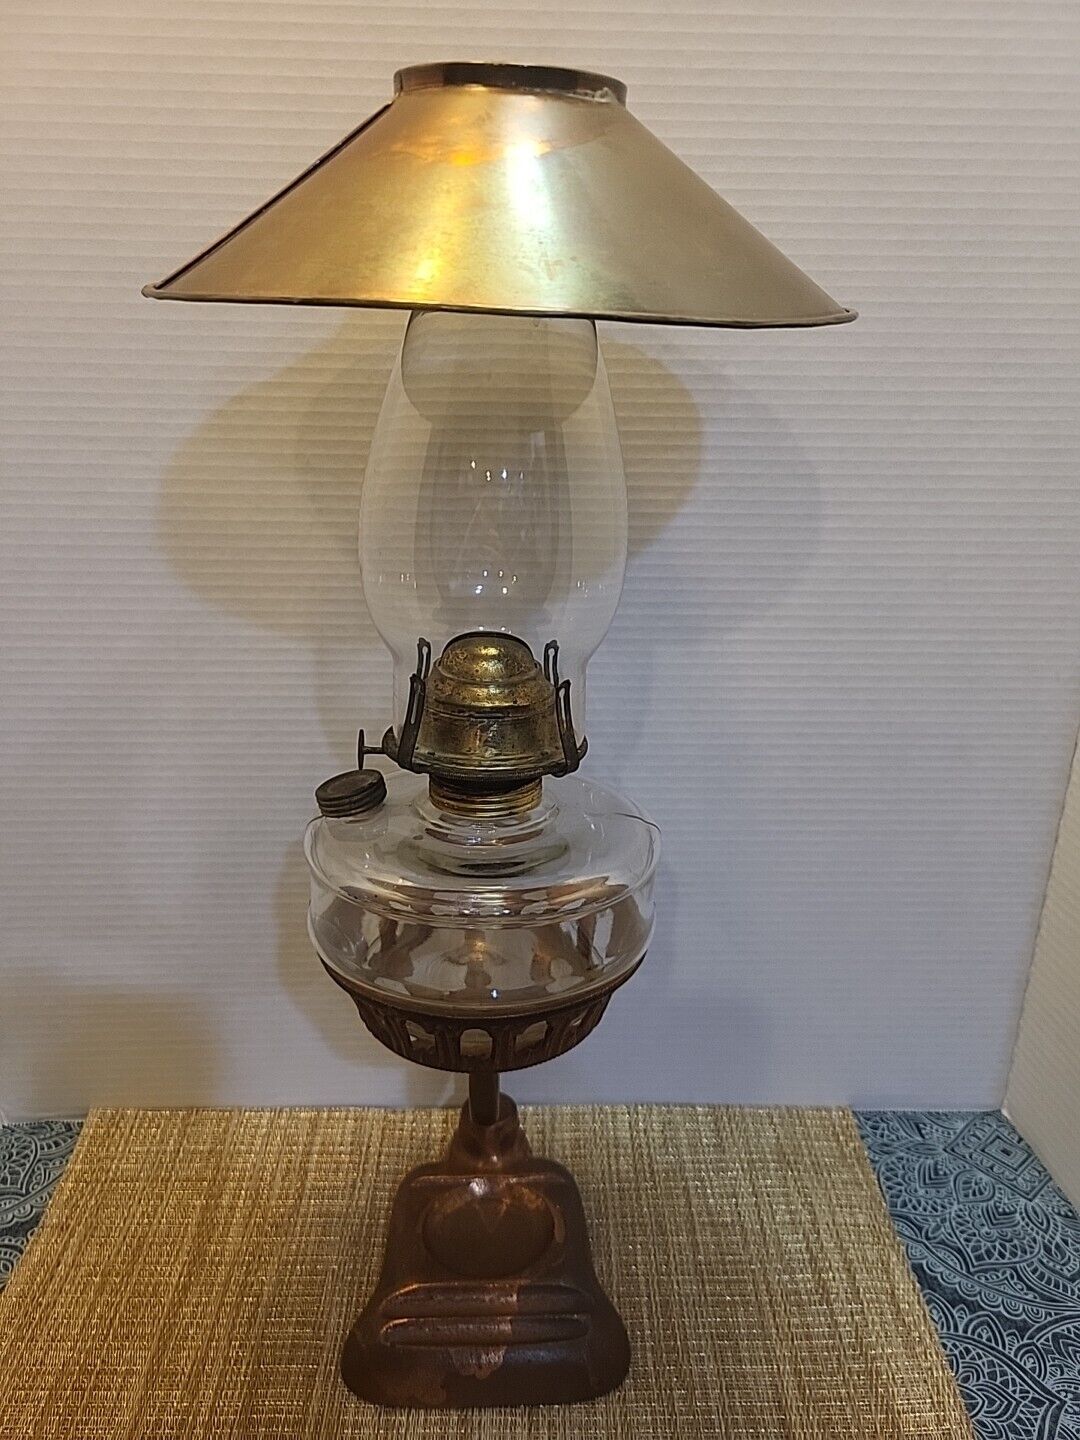 Antique P&A Oil Lamp With Copper Base And Shade Tabletop 